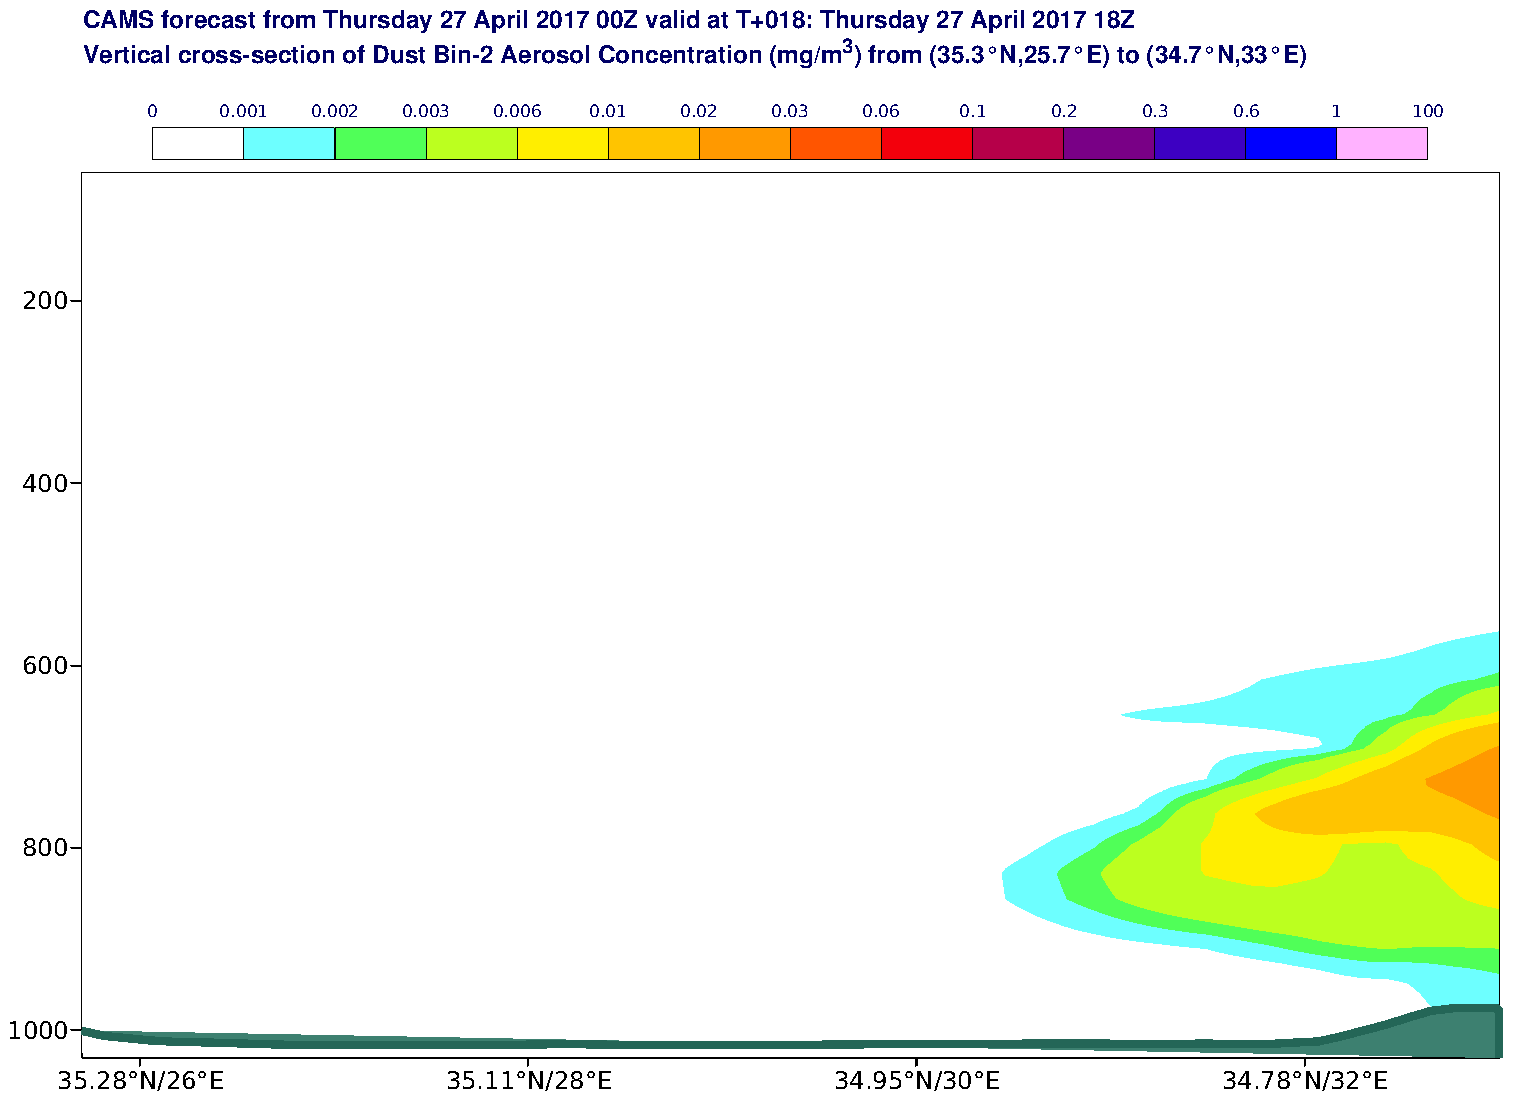 Vertical cross-section of Dust Bin-2 Aerosol Concentration (mg/m3) valid at T18 - 2017-04-27 18:00